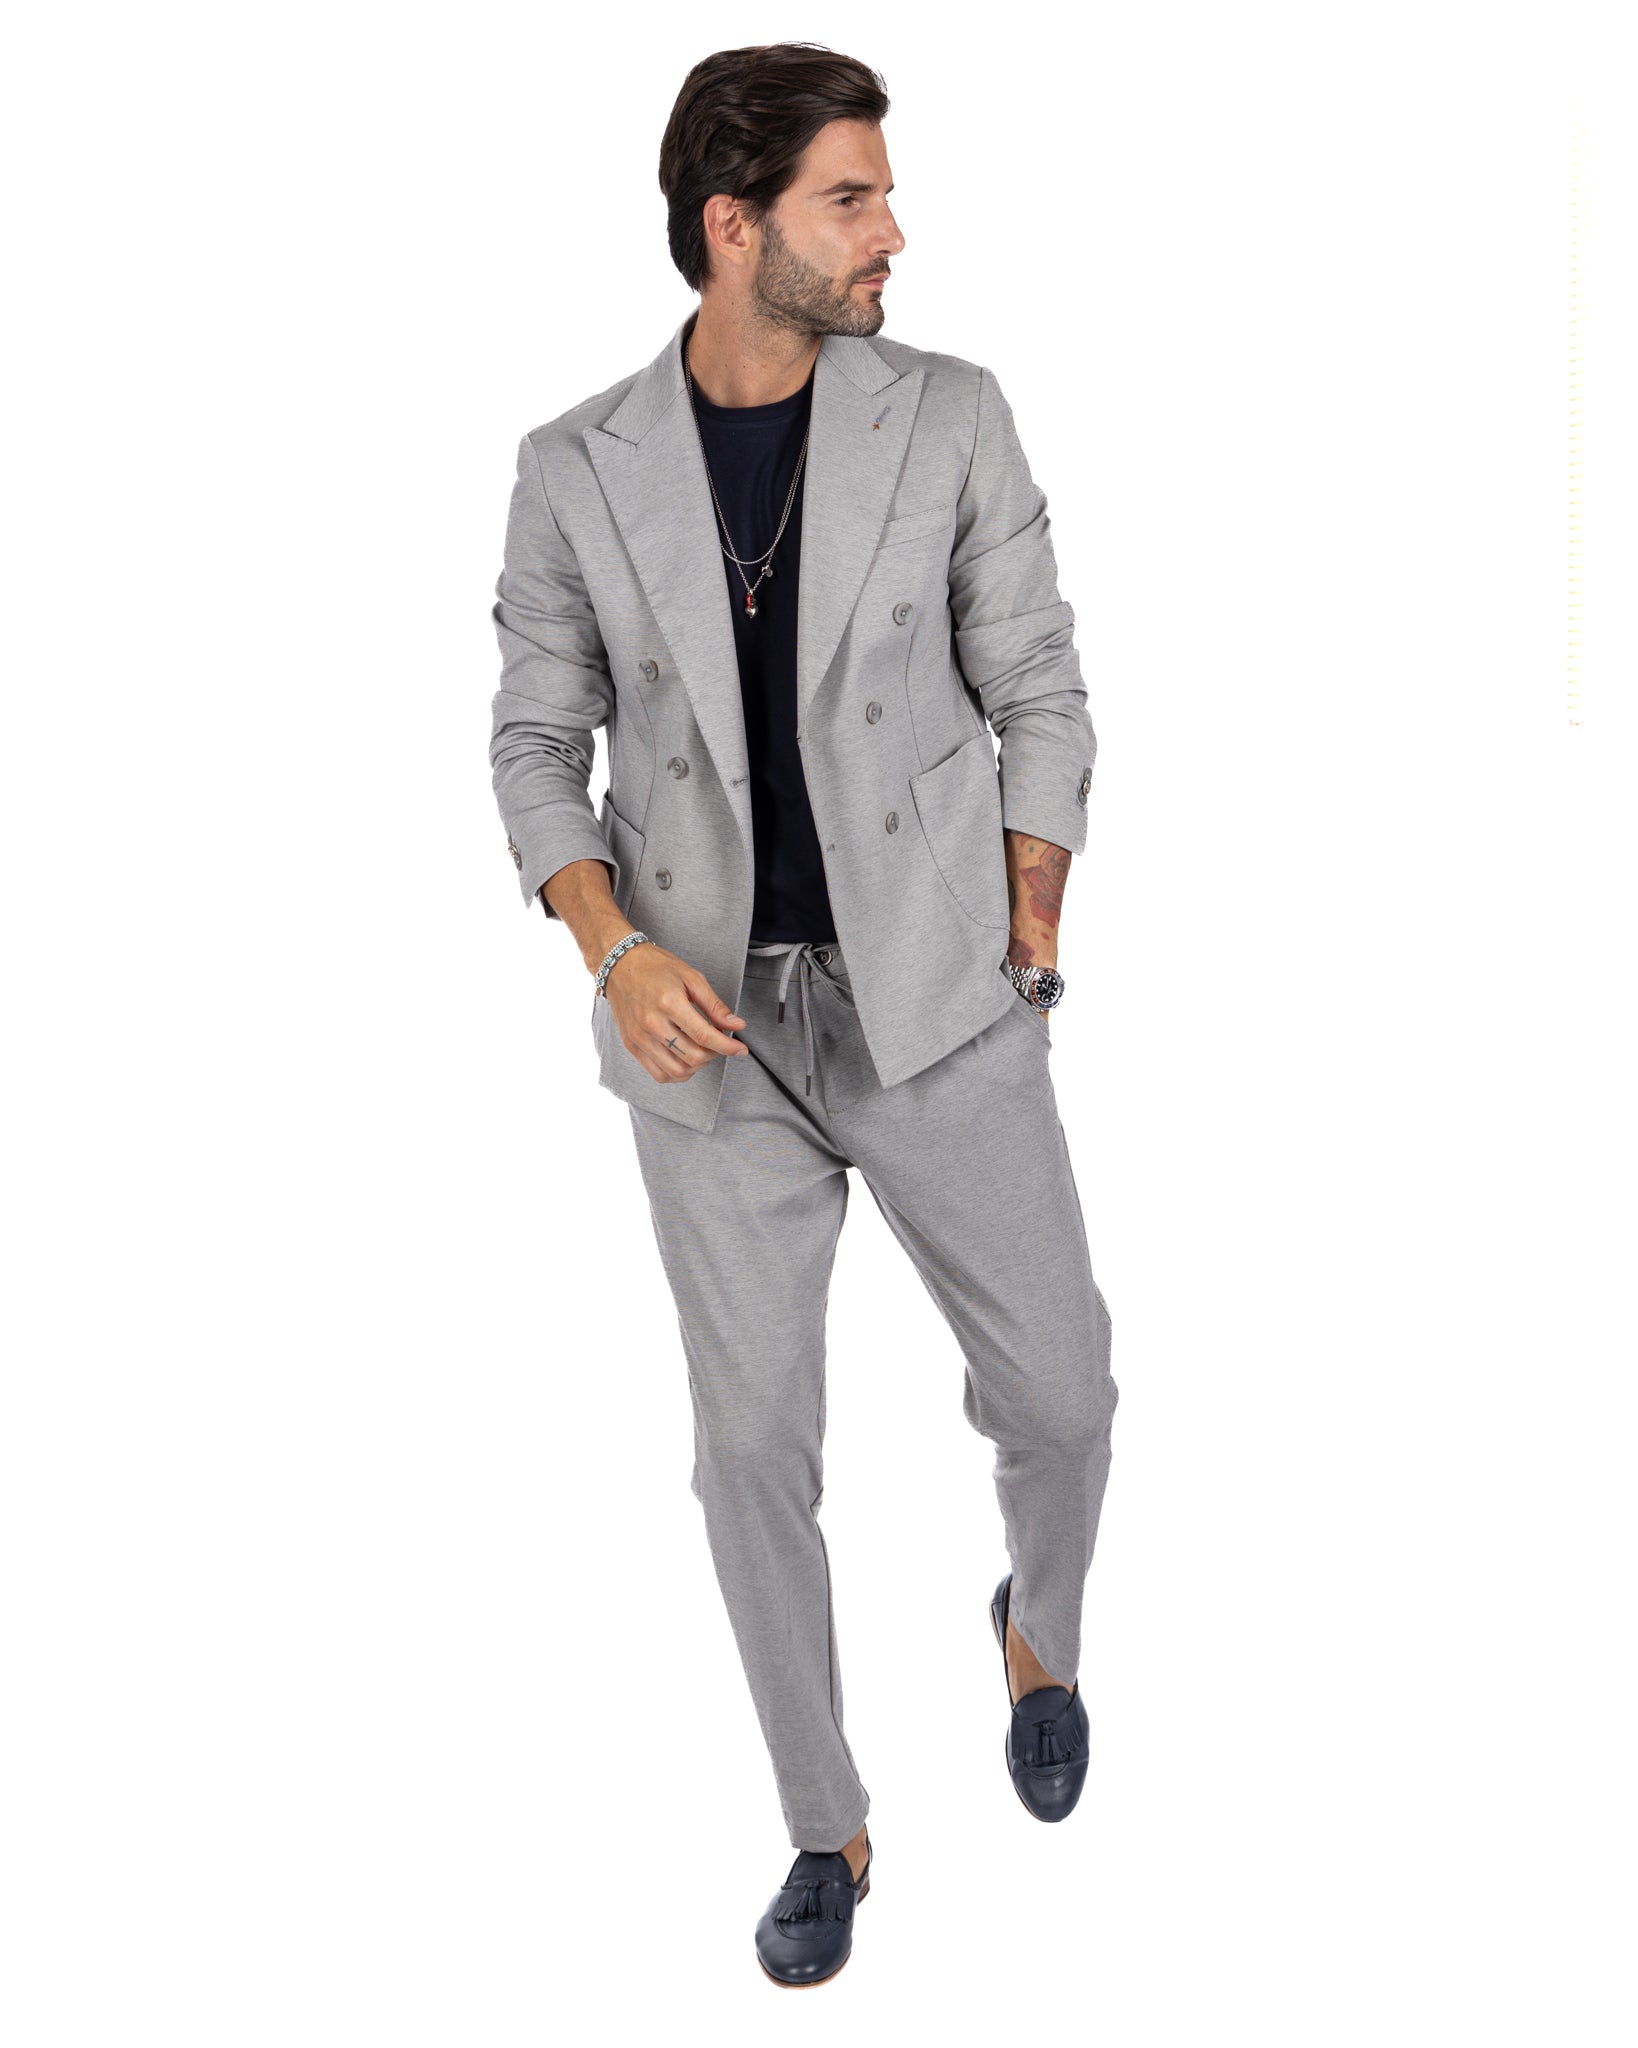 Shelby - gray suit